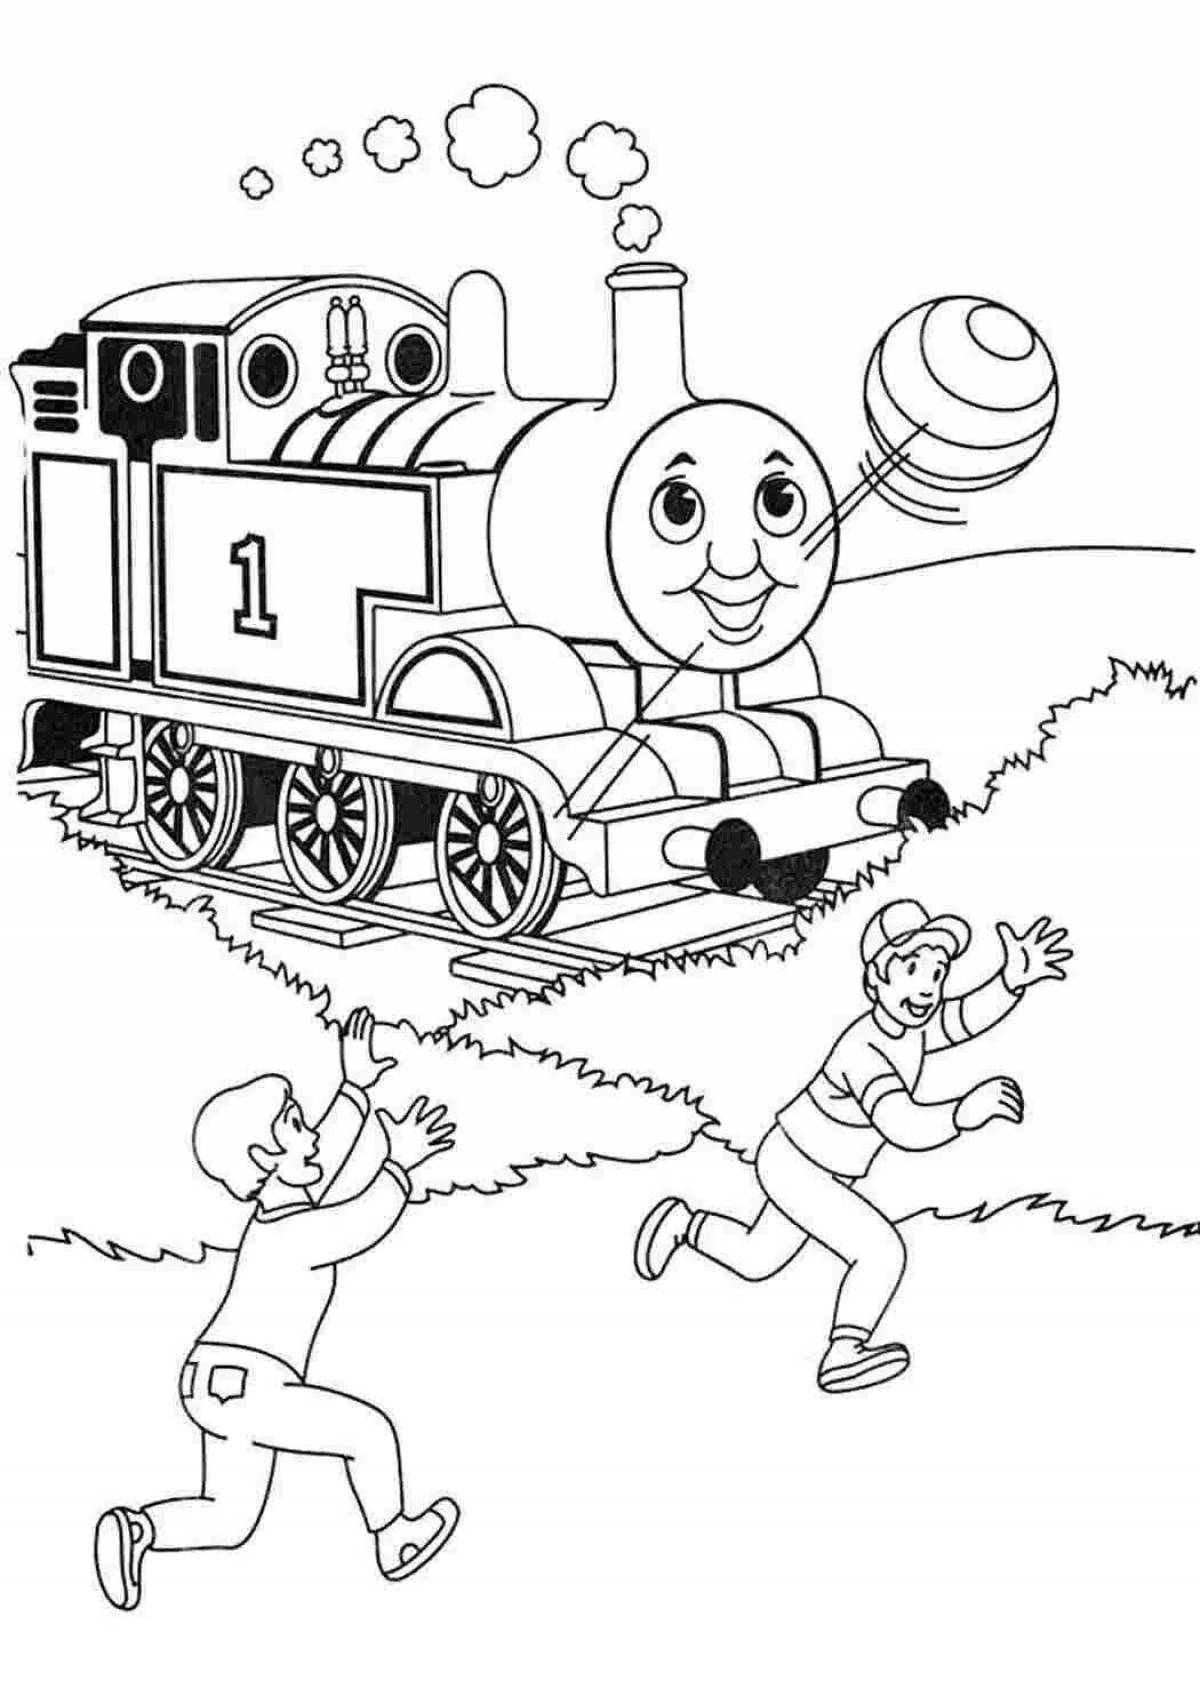 Coloring book funny railroad safety